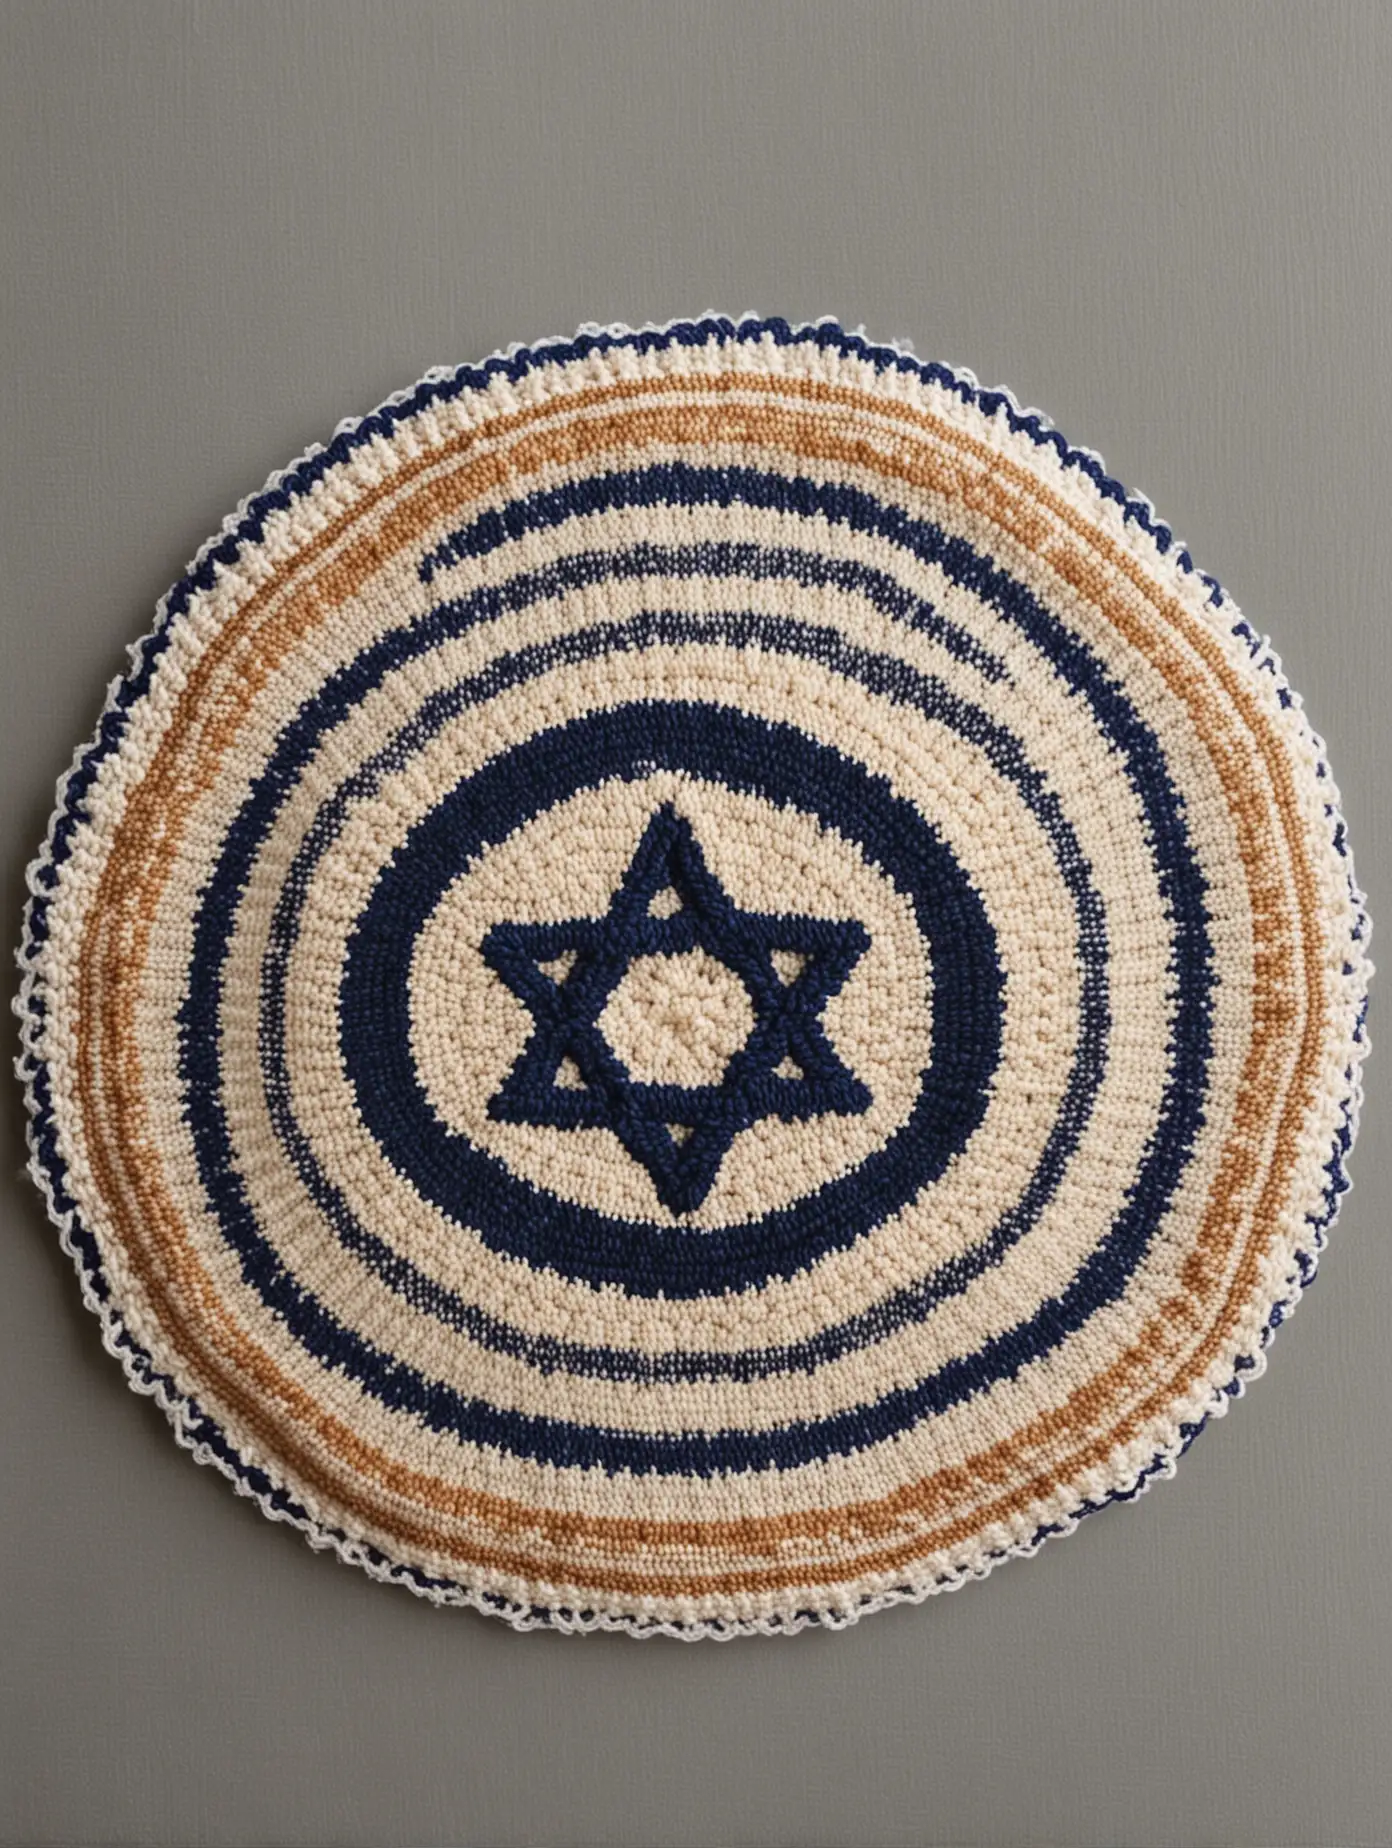 Israeli Round Knitted Kippah Traditional Jewish Headwear in Vibrant Colors